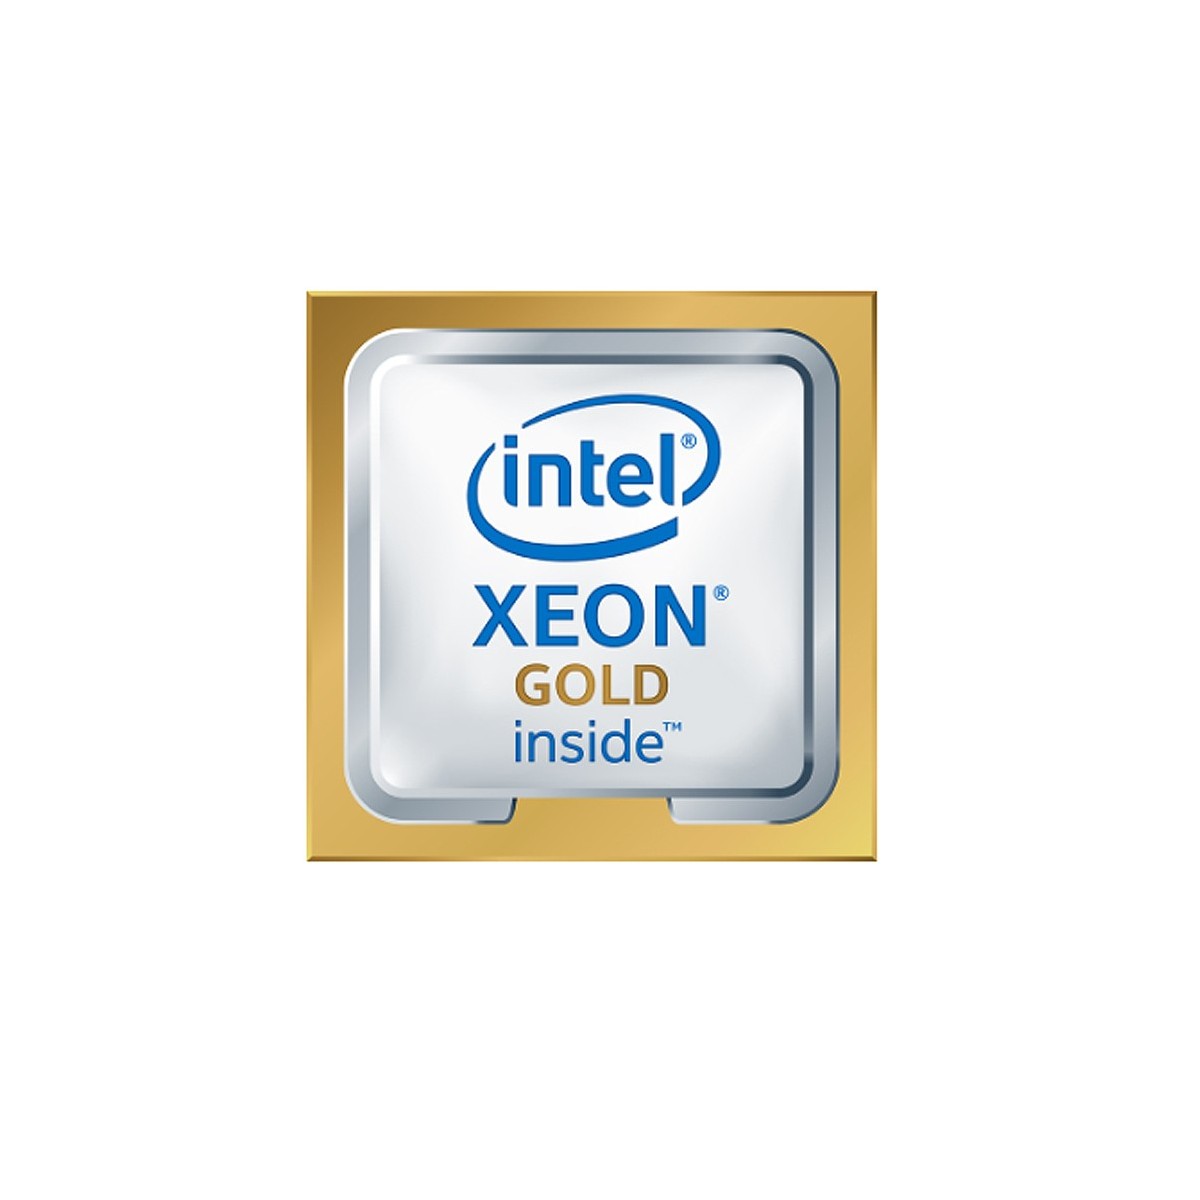 HPE Processor Intel Xeon-Gold 5317 3.0GHz 12-core 150W for - Xeon Gold - 3 GHz